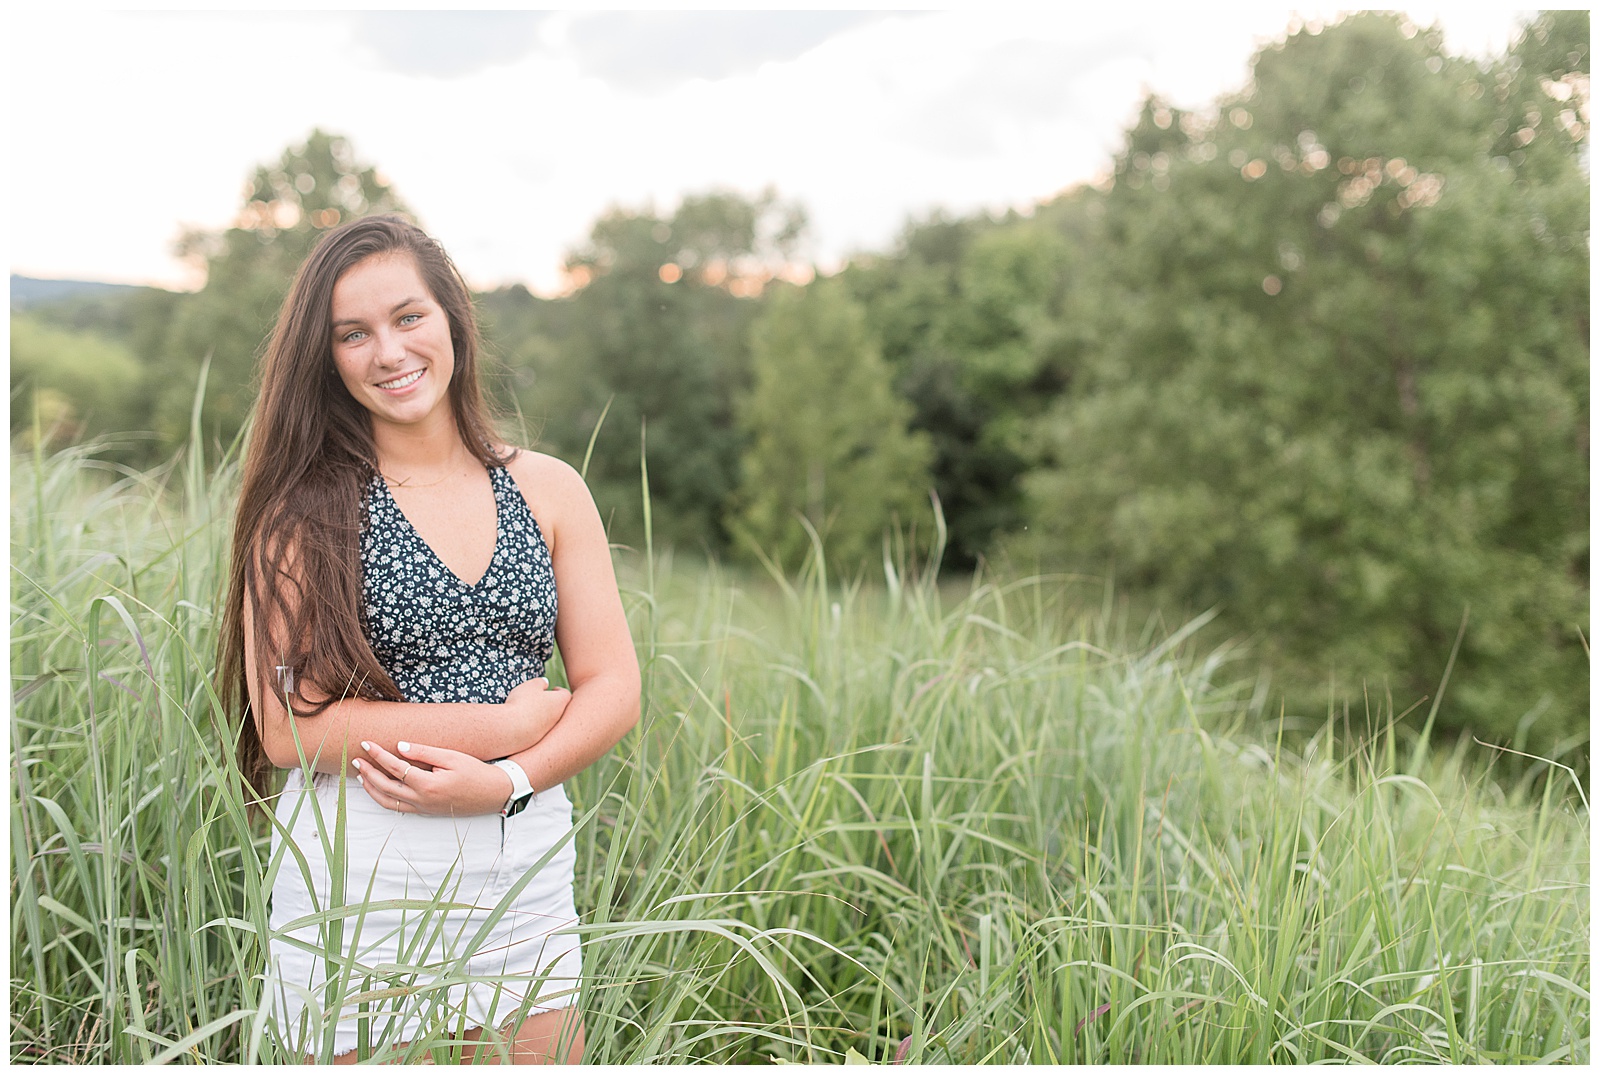 senior standing among tall grasses with white skirt and floral shirt smiling at camera